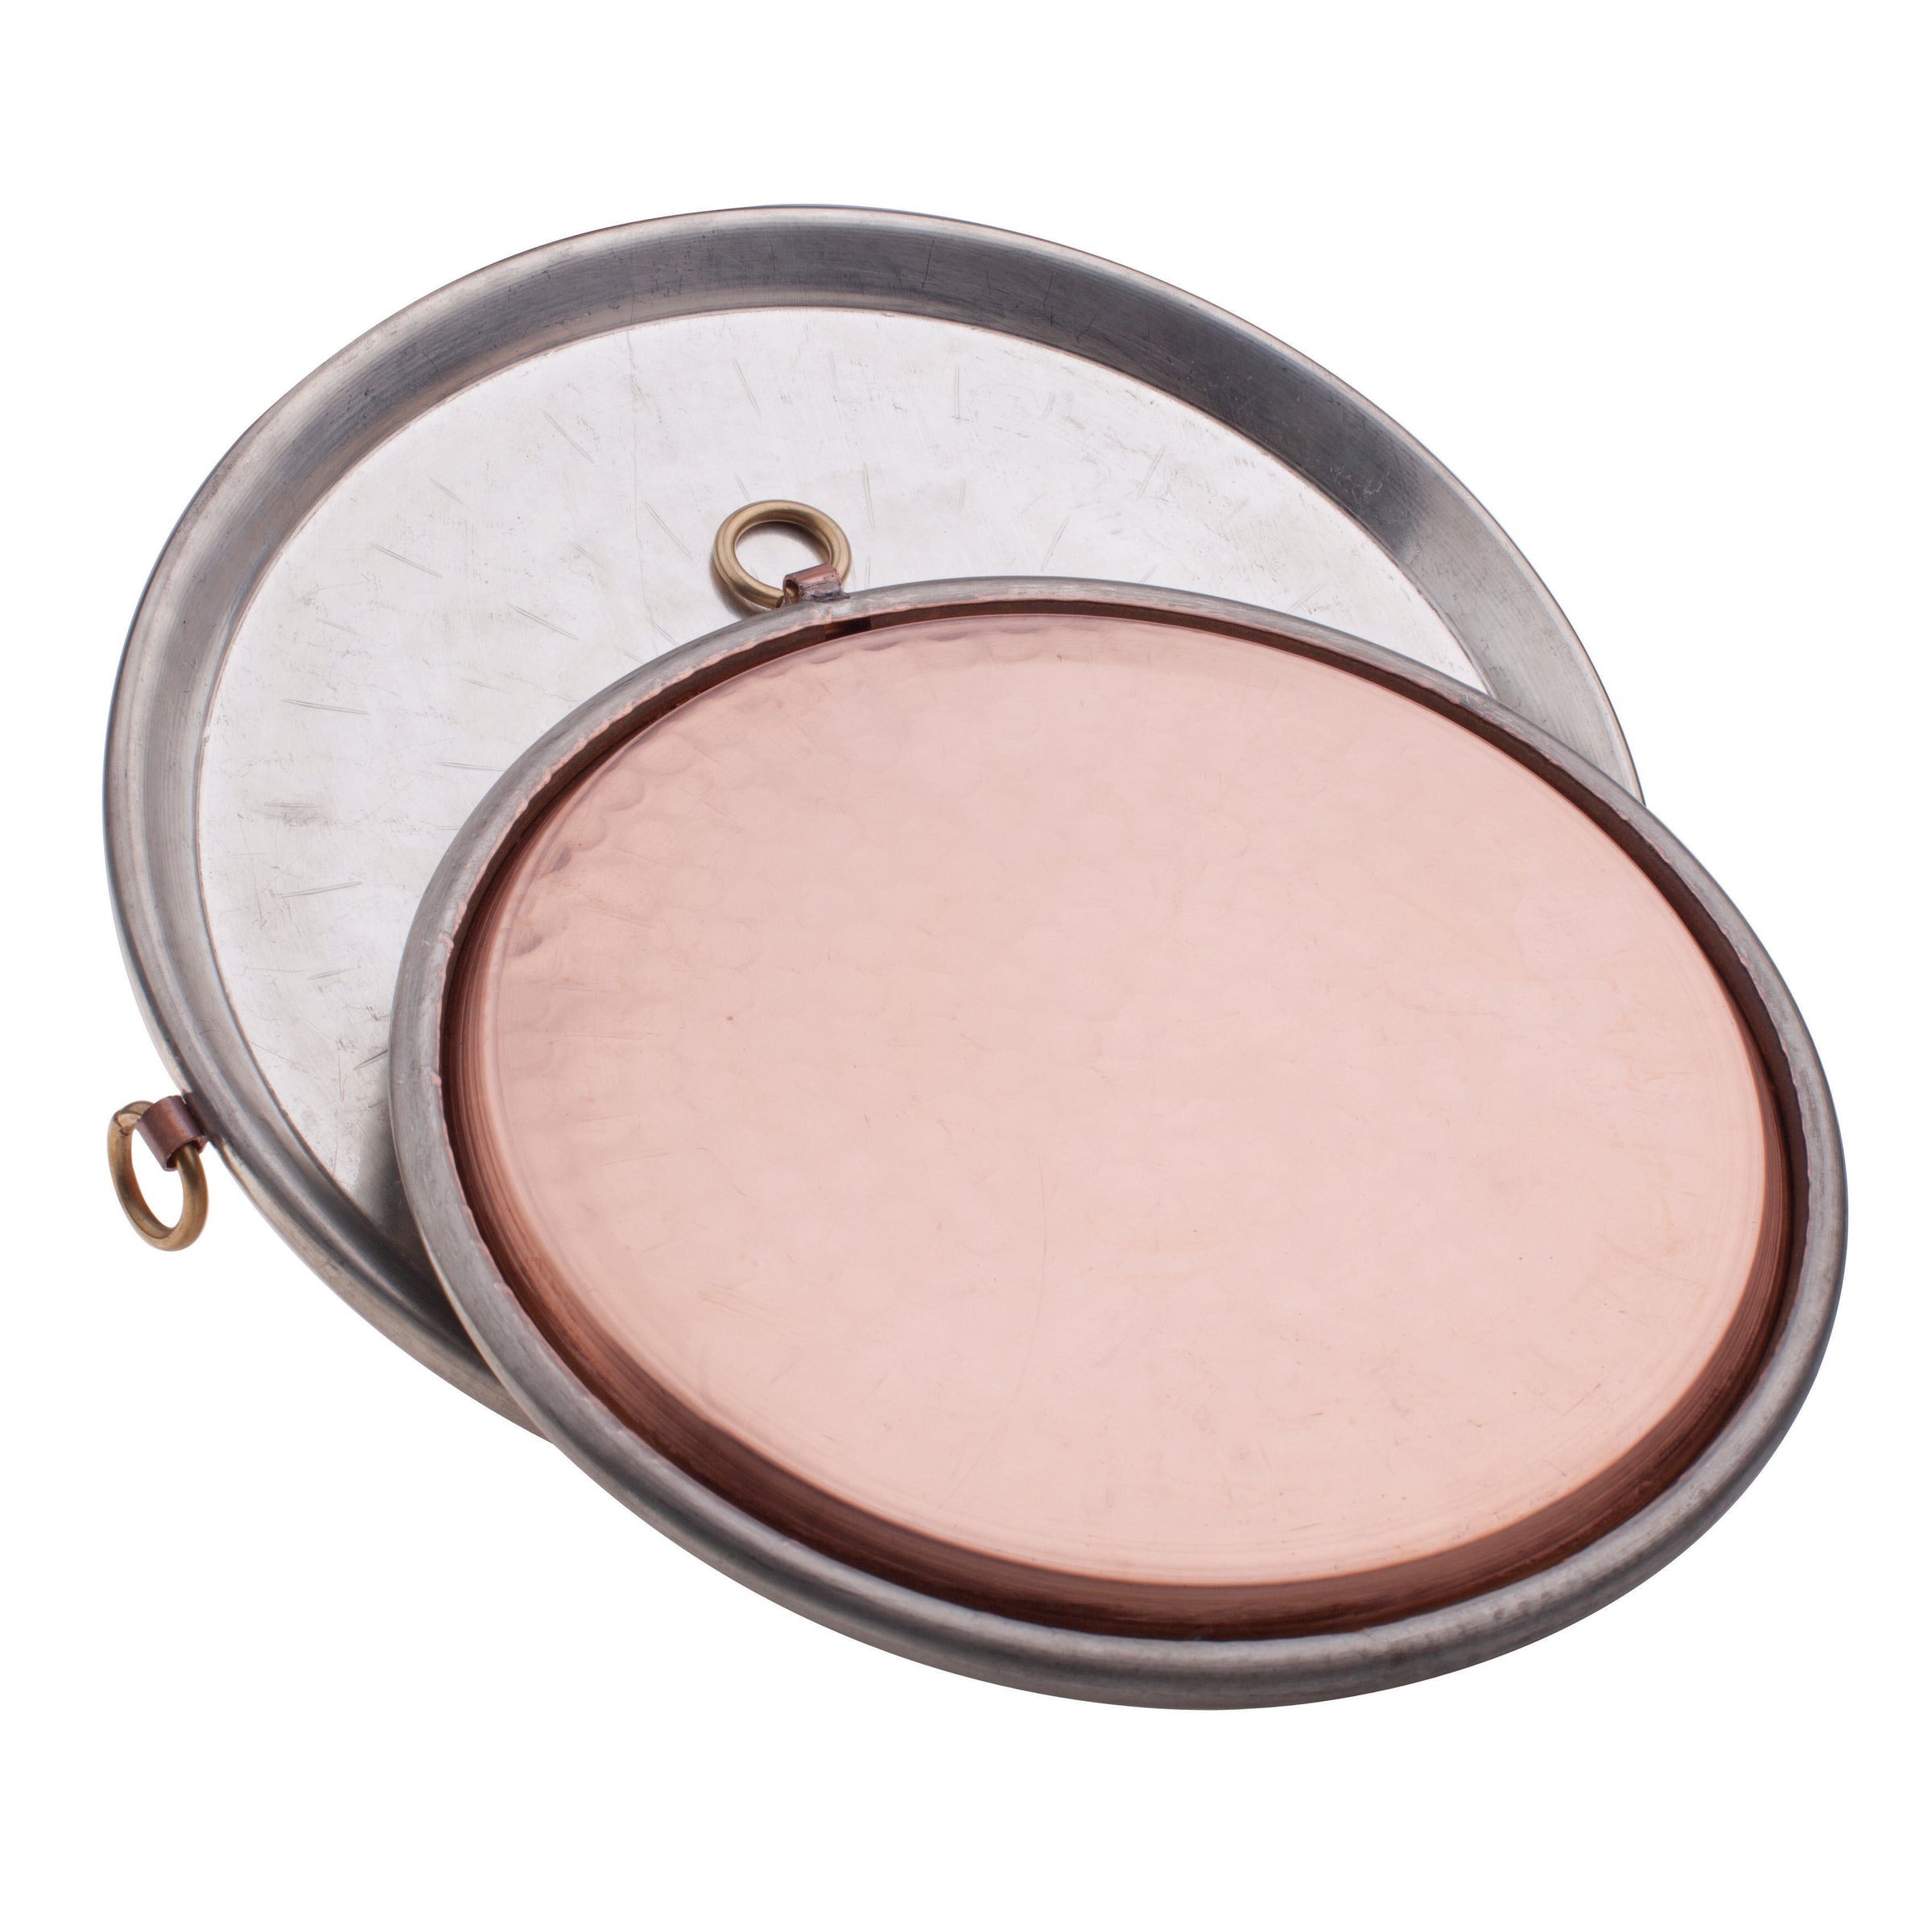 Agnelli Copper Mini Fry Pan With Brass Handle, 17.7-Oz